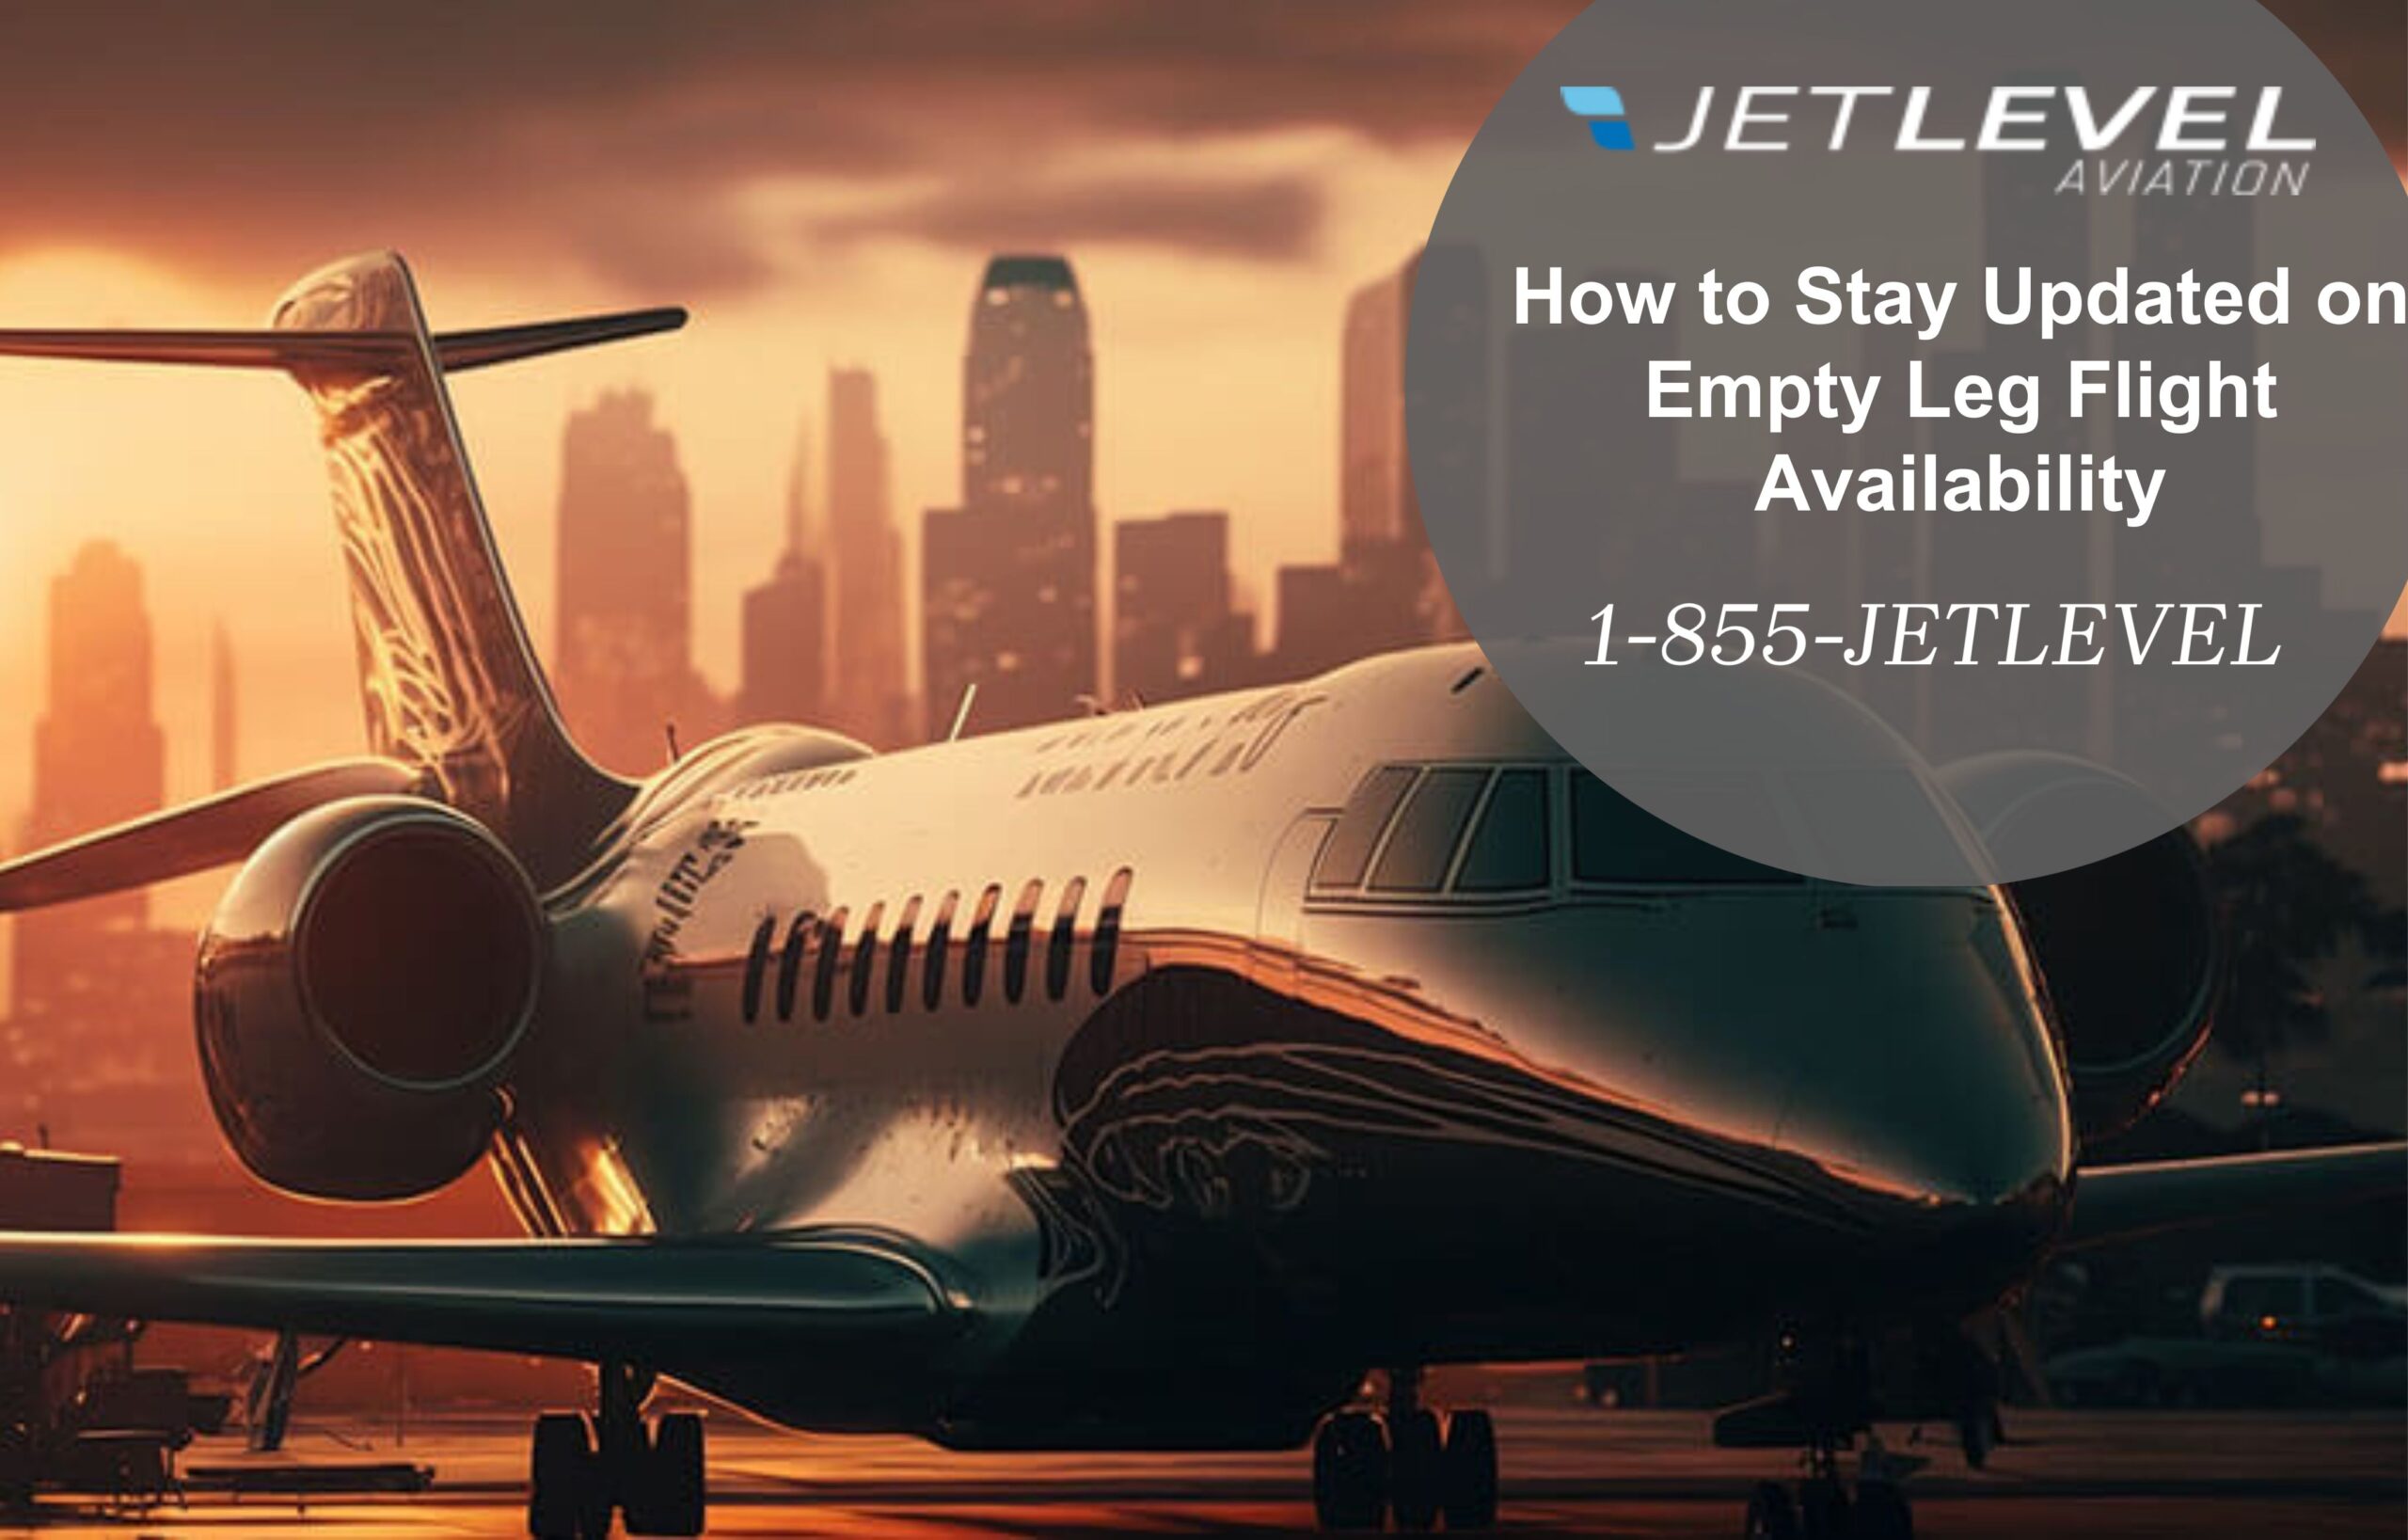 How to Stay Updated on Empty Leg Flight Availability